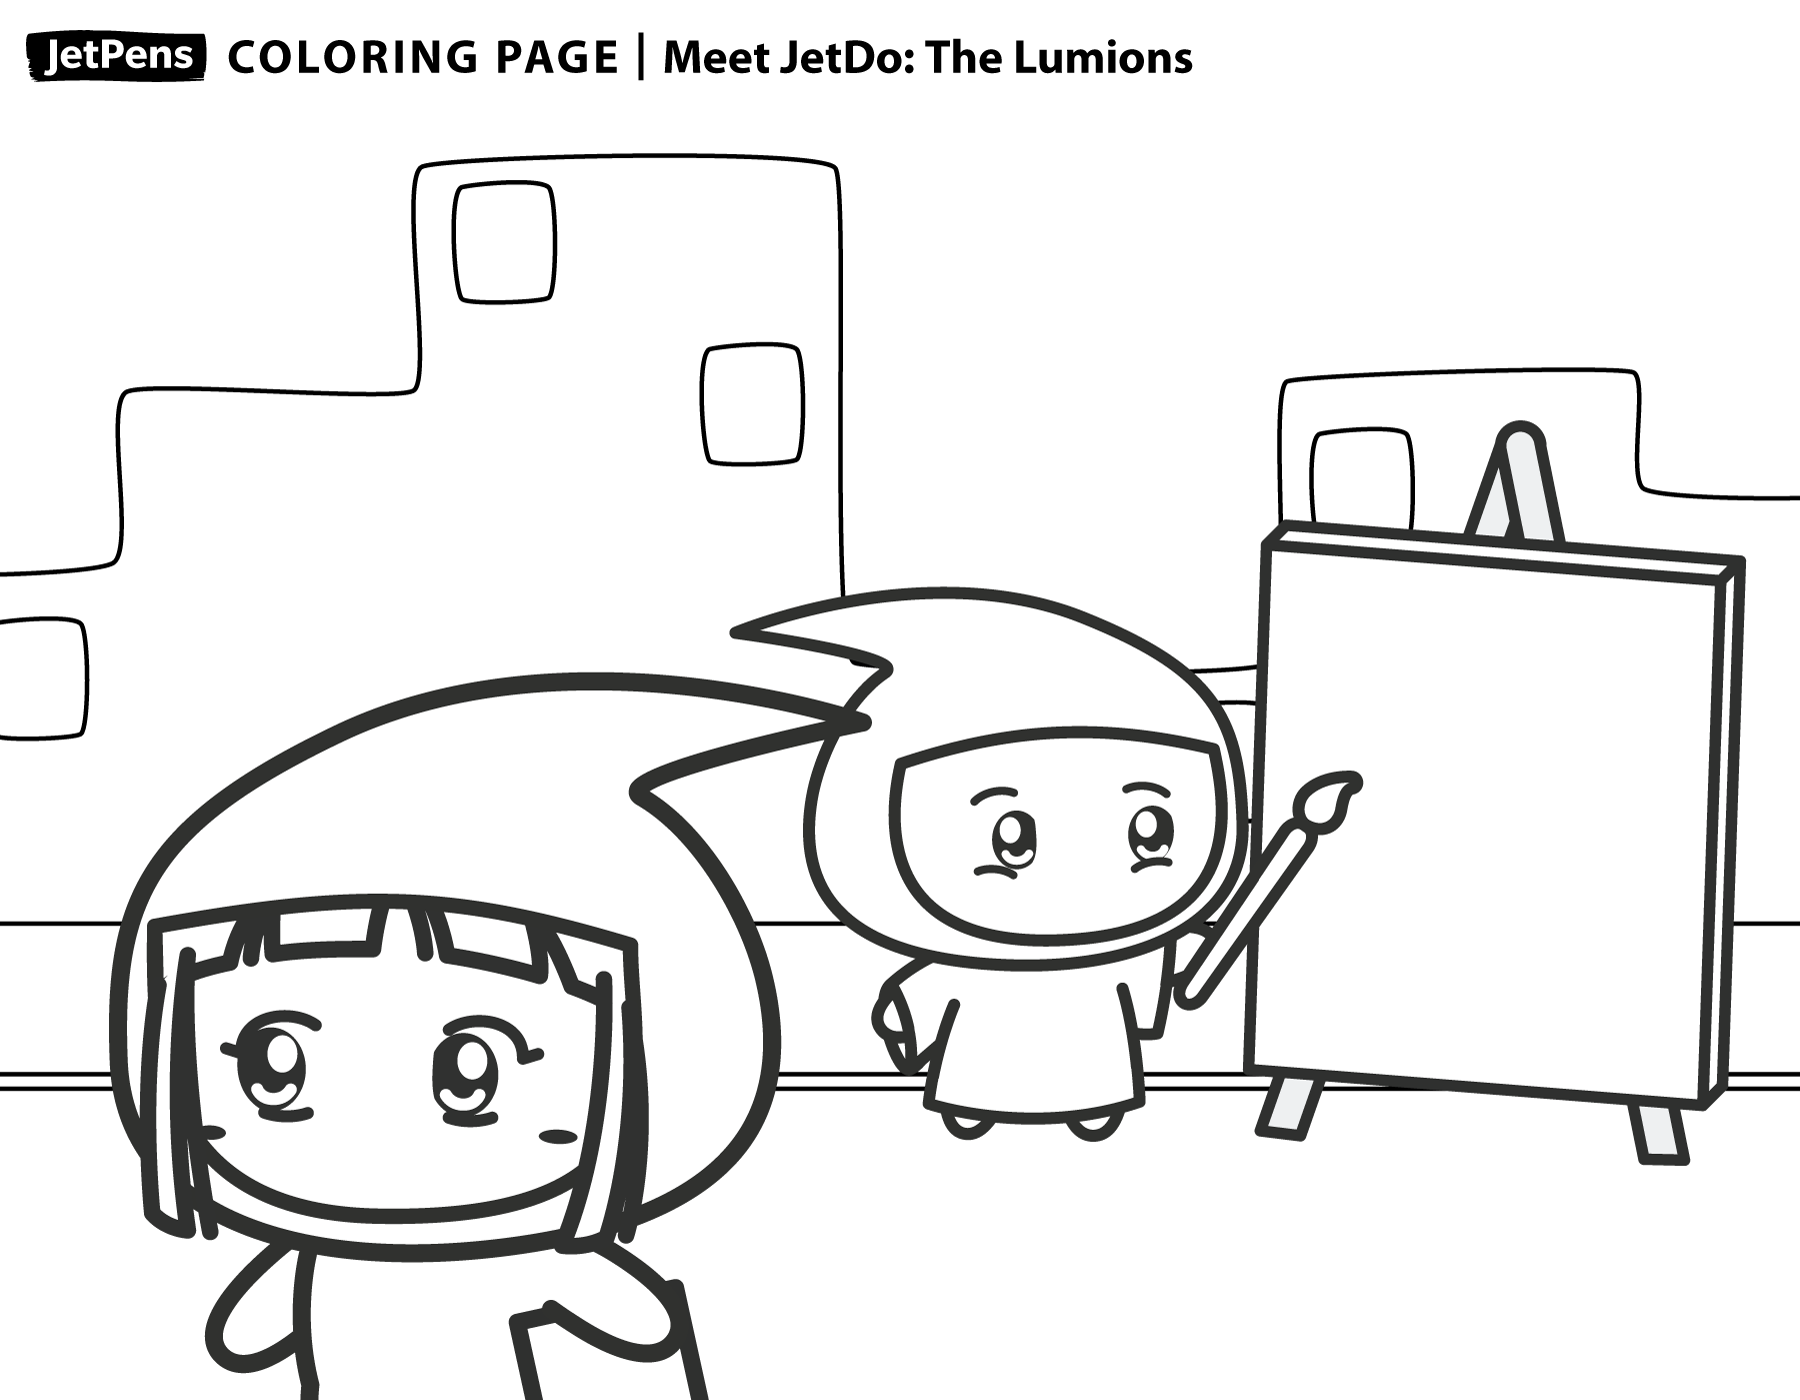 Drawings To Paint & Colour Pocoyo - Print Design 009